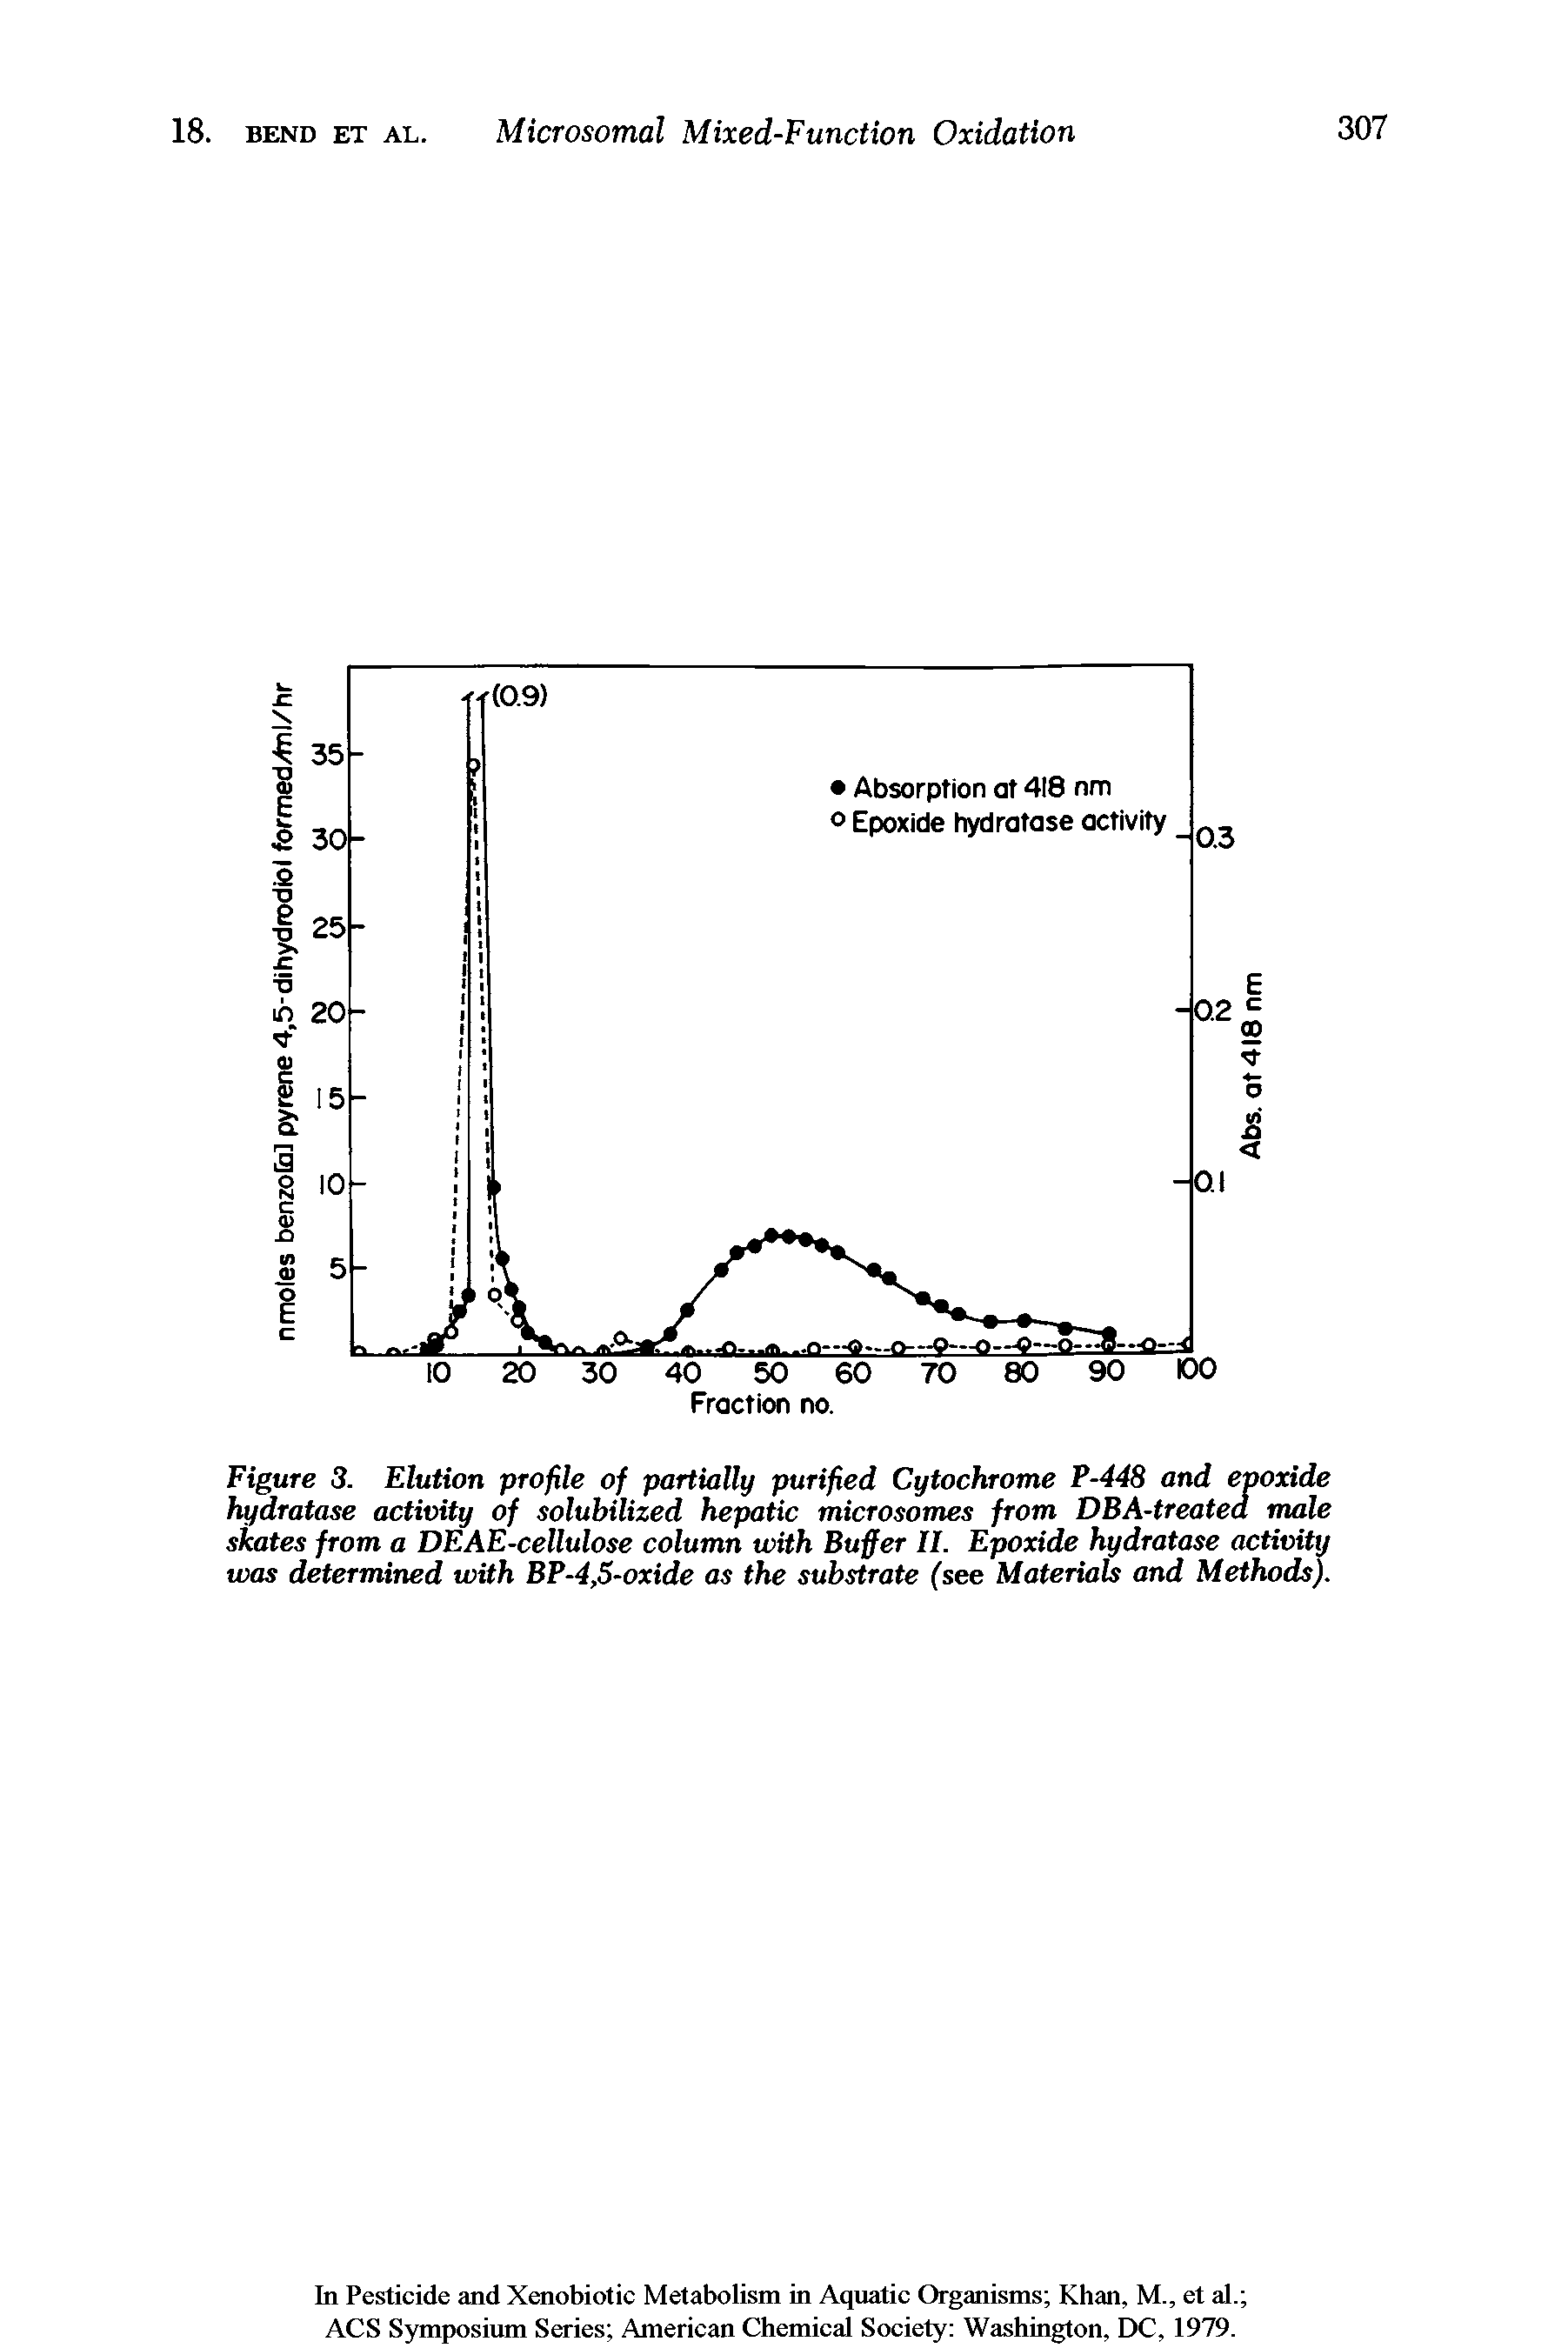 Figure 3. Elution profile of partially purified Cytochrome P-448 and epoxide hydratase activity of solubilized hepatic microsomes from DBA-treated male skates from a DEAE-cellulose column with Buffer II. Epoxide hydratase activity was determined with BP-4,5-oxide as the substrate (see Materials and Methods).